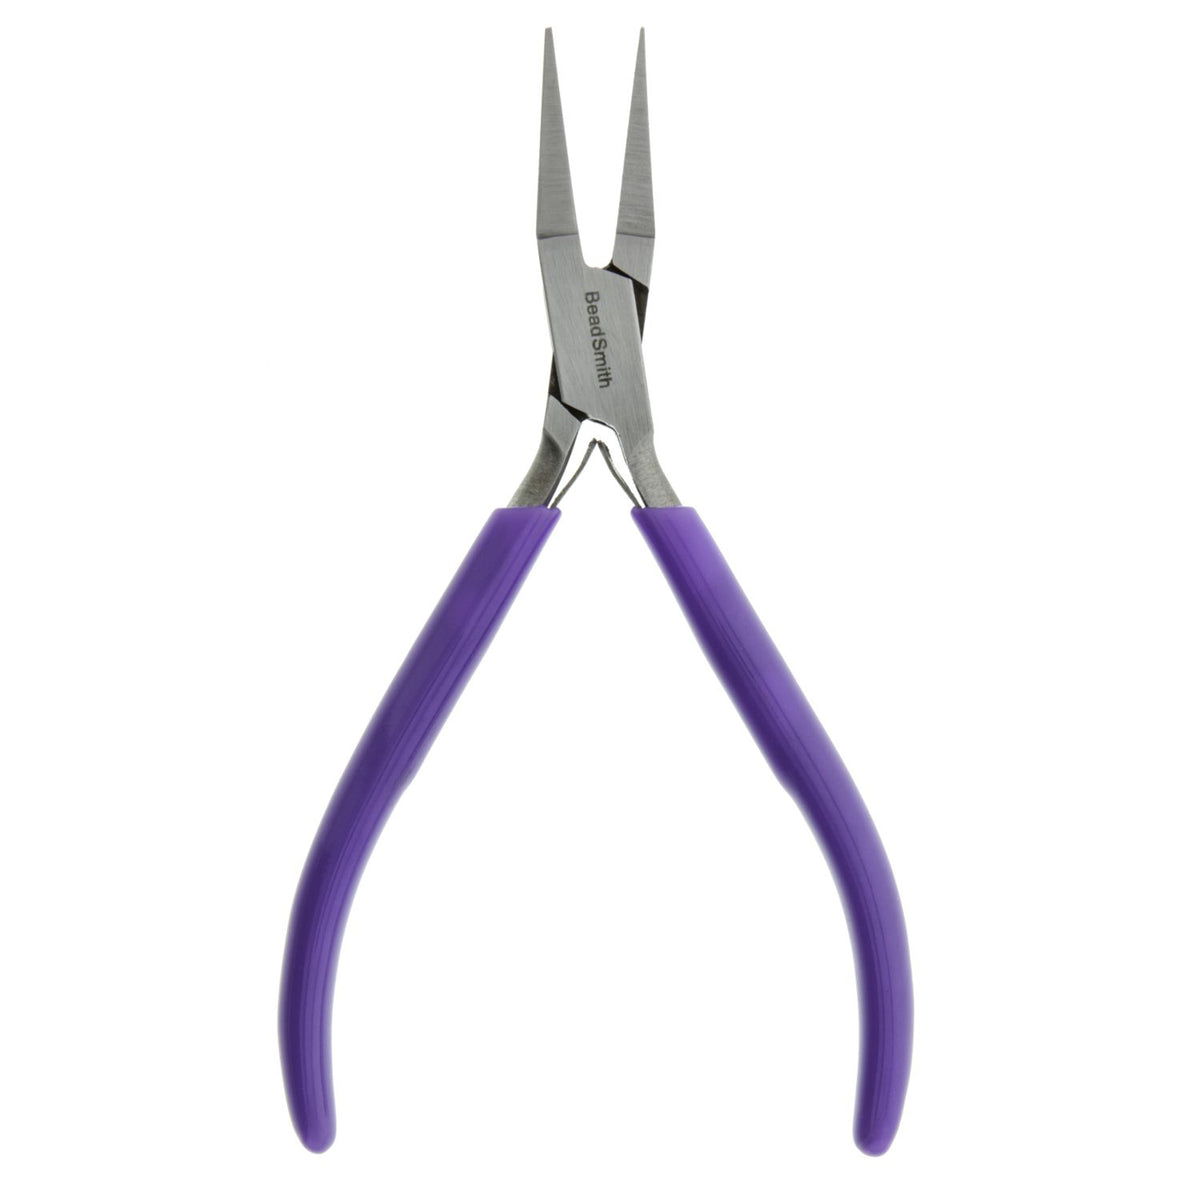 Crimper - Xuron®, Four in One Crimping Pliers (494)